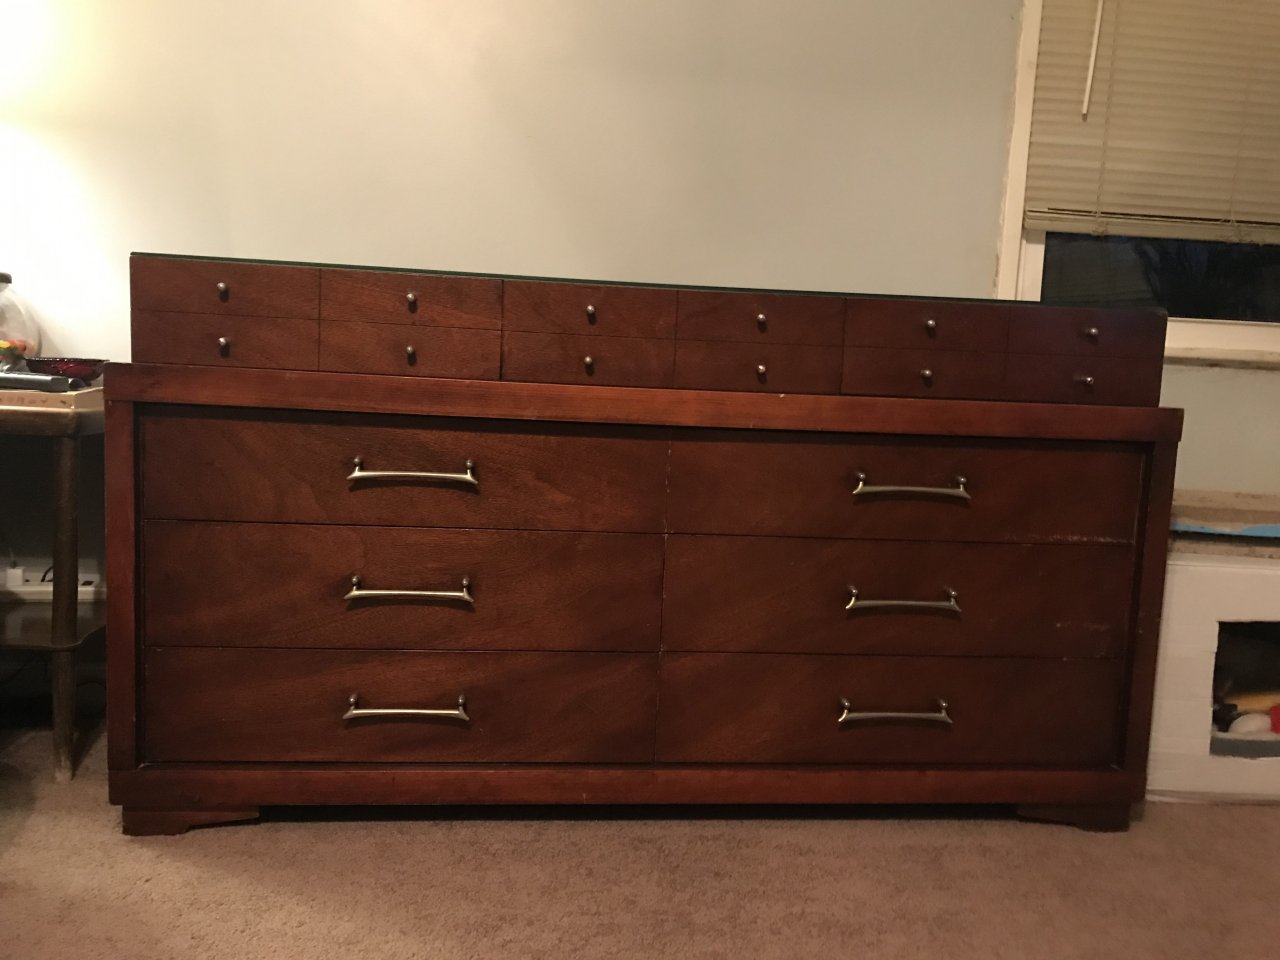 Thomasville Chair Company Dresser Set | My Antique Furniture Collection